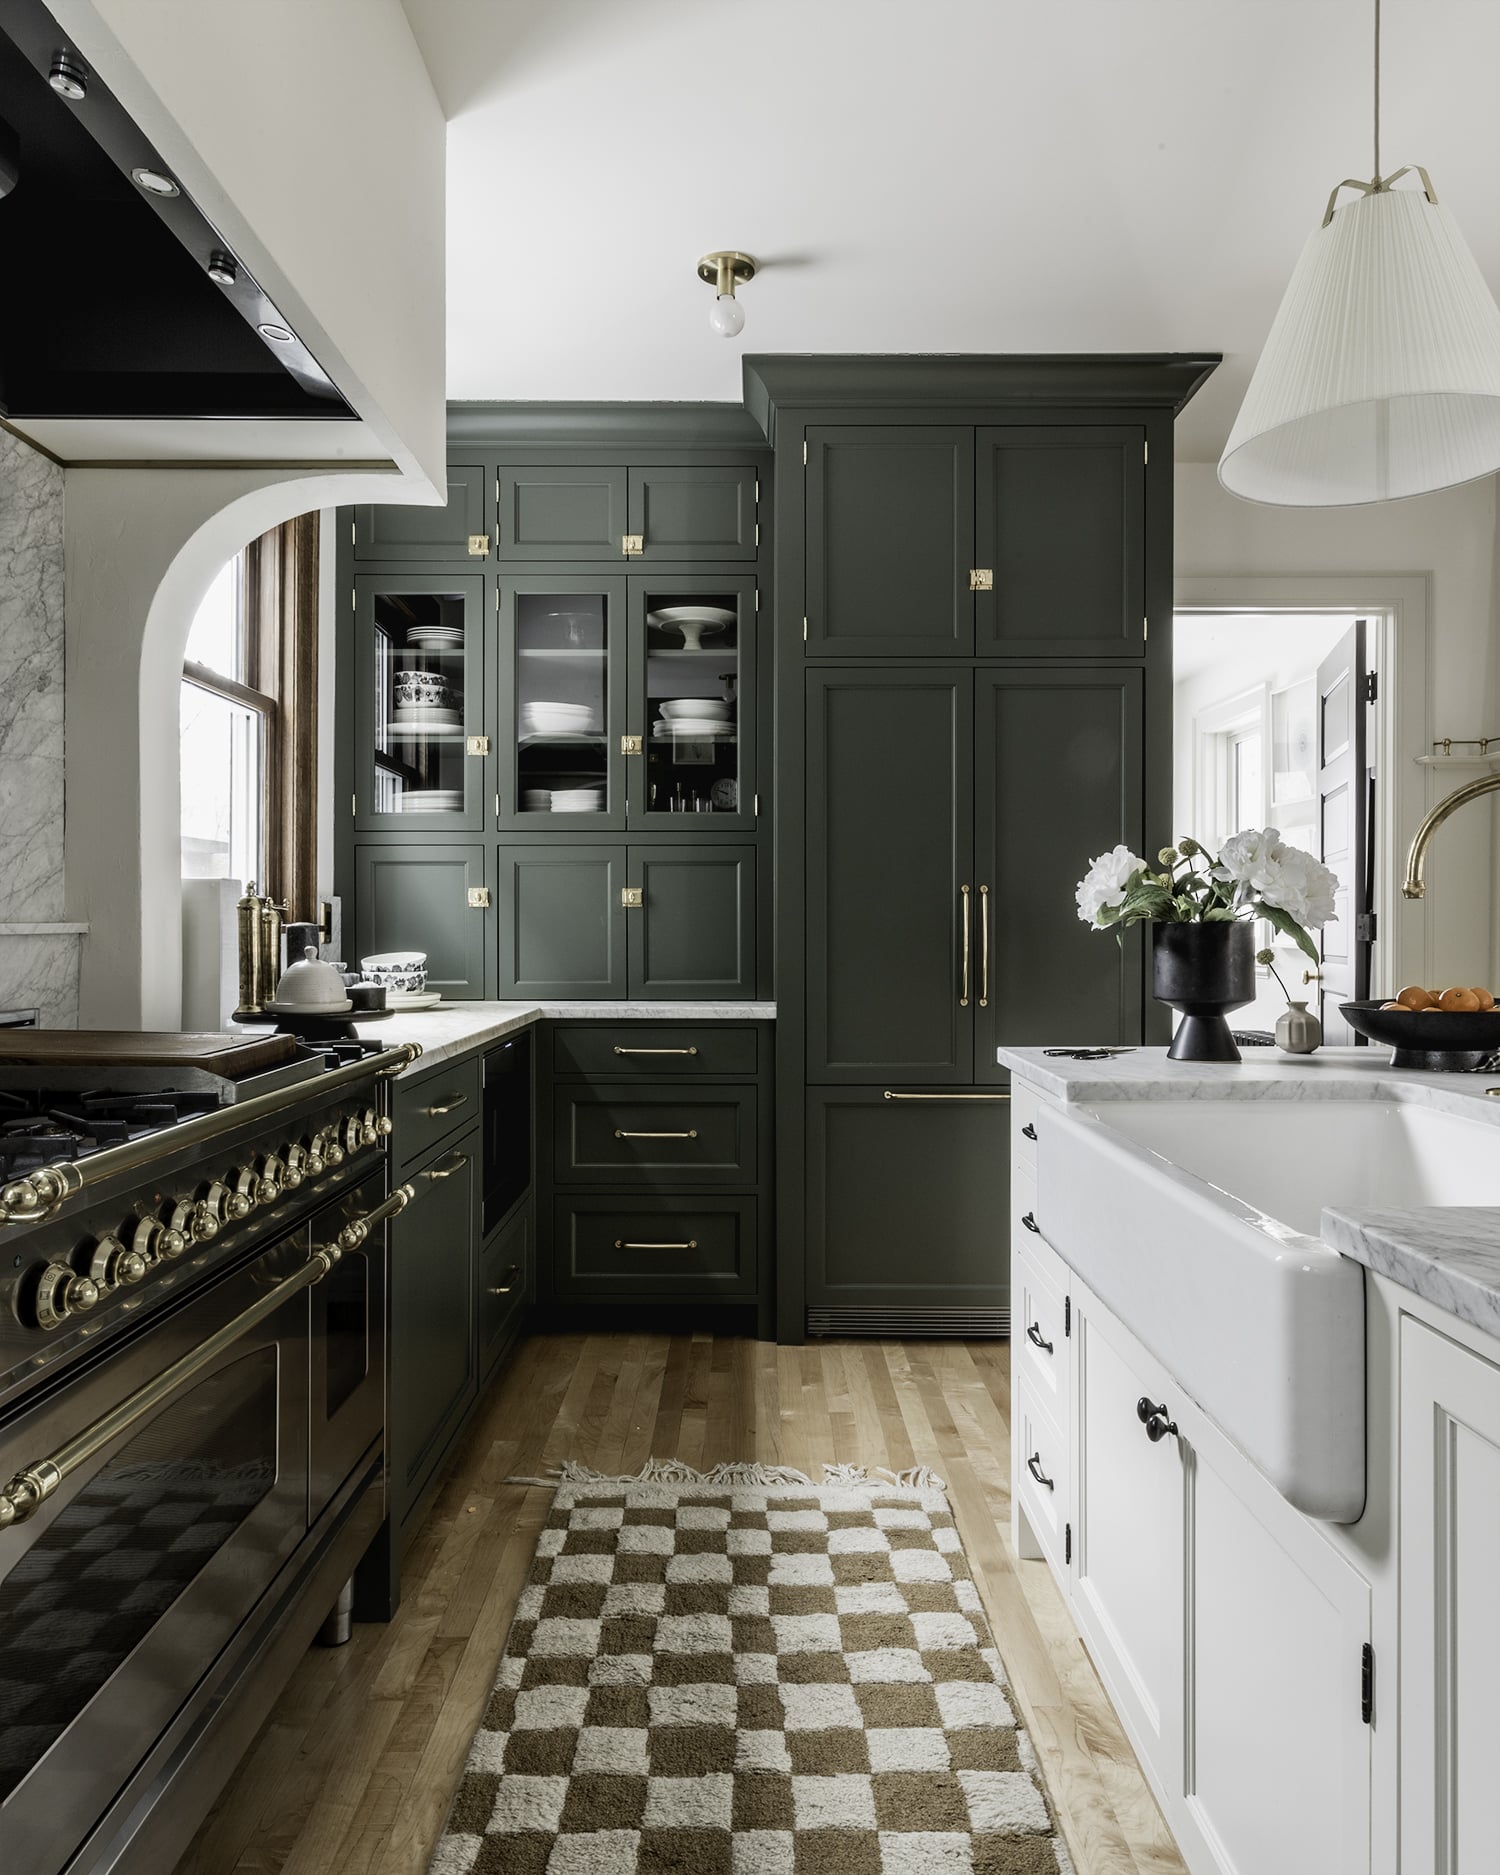 The Final Reveal of our Historic Kitchen Renovation